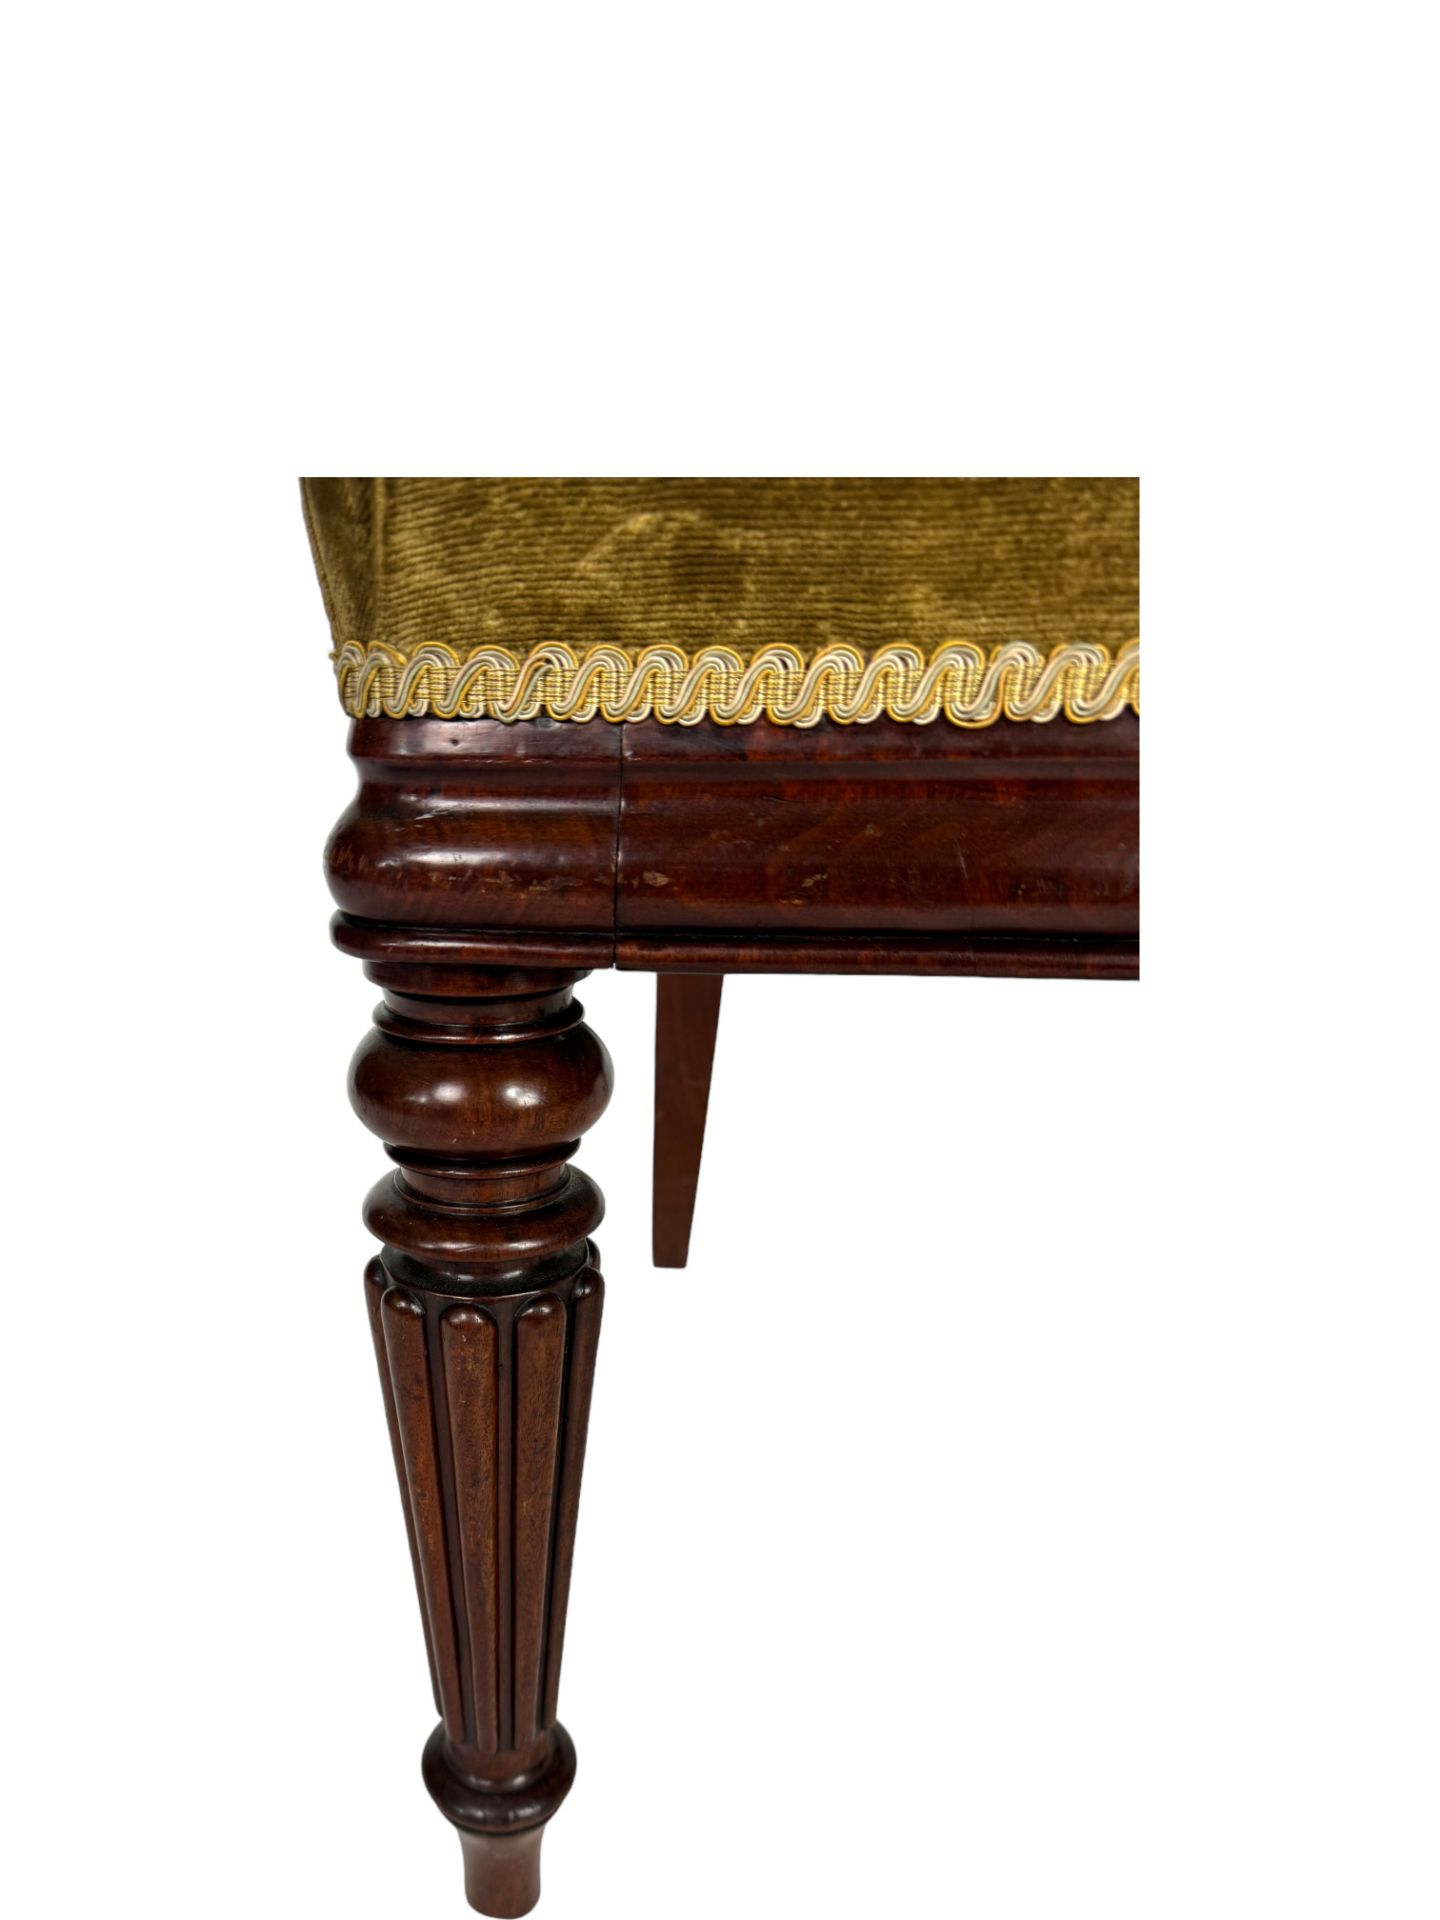 A George IV mahogany dining chair attributed to Gillows - Image 4 of 6